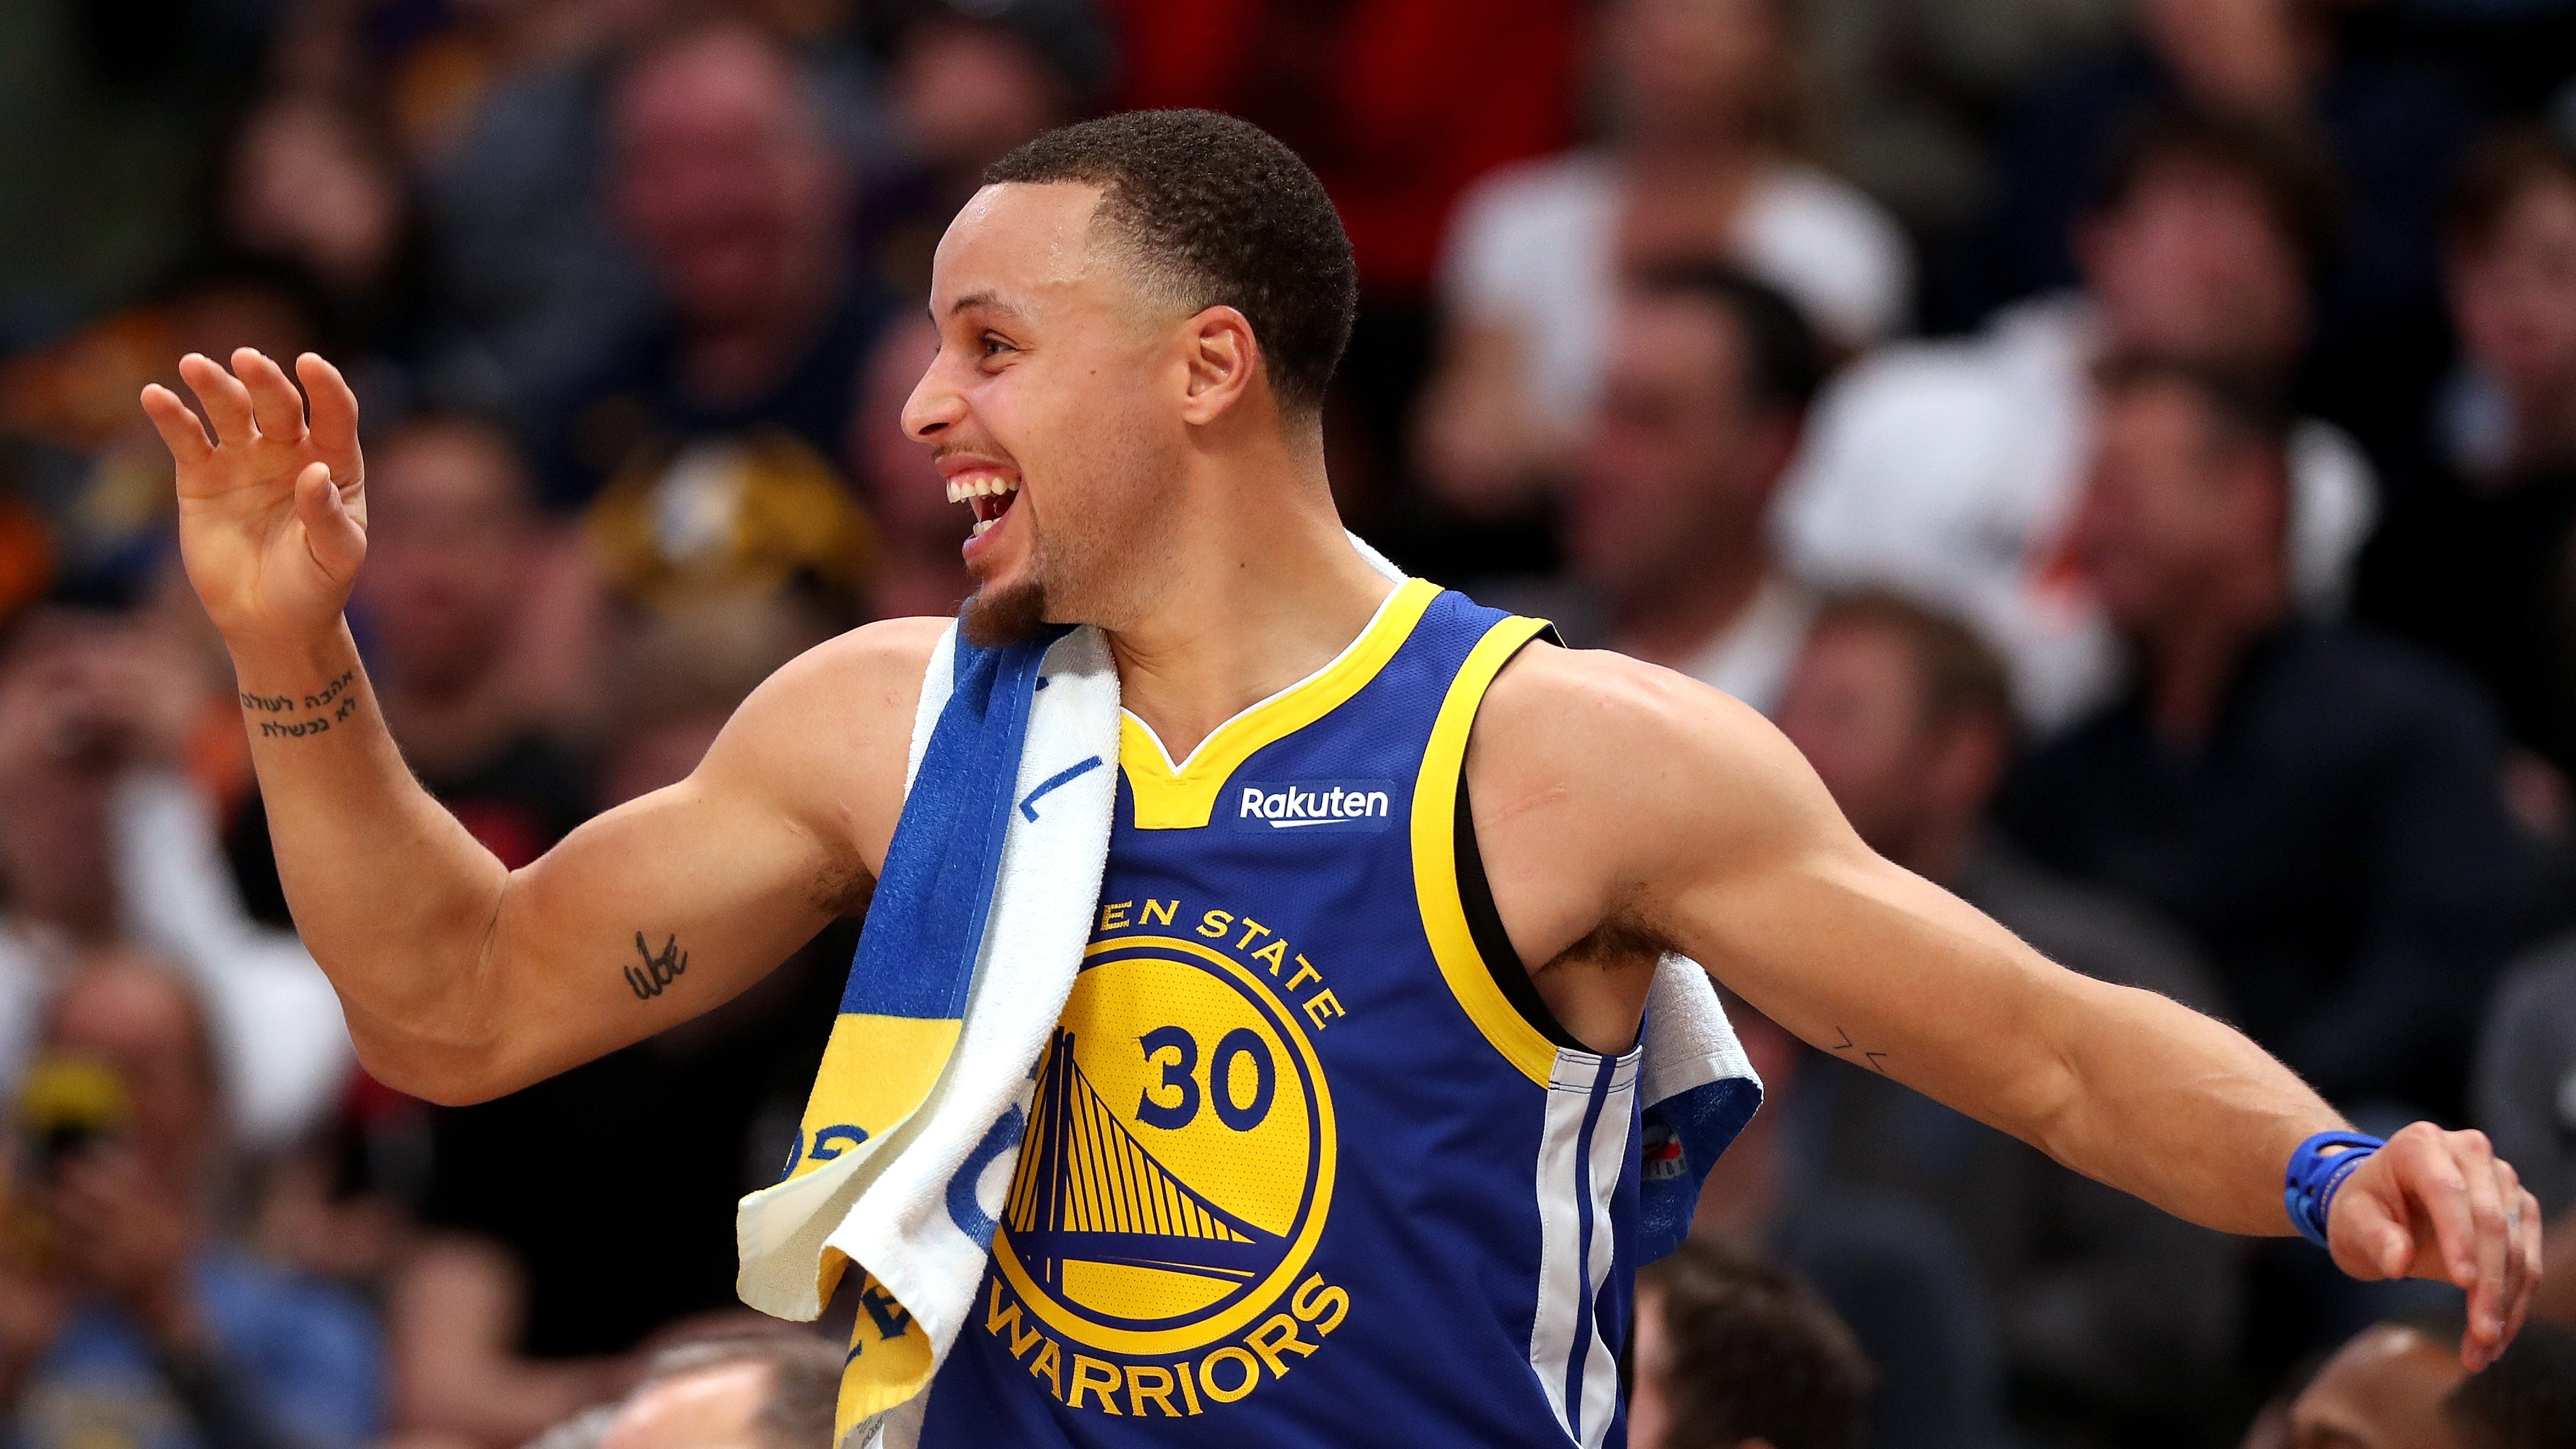 Steph curry wrist tattoo meaning